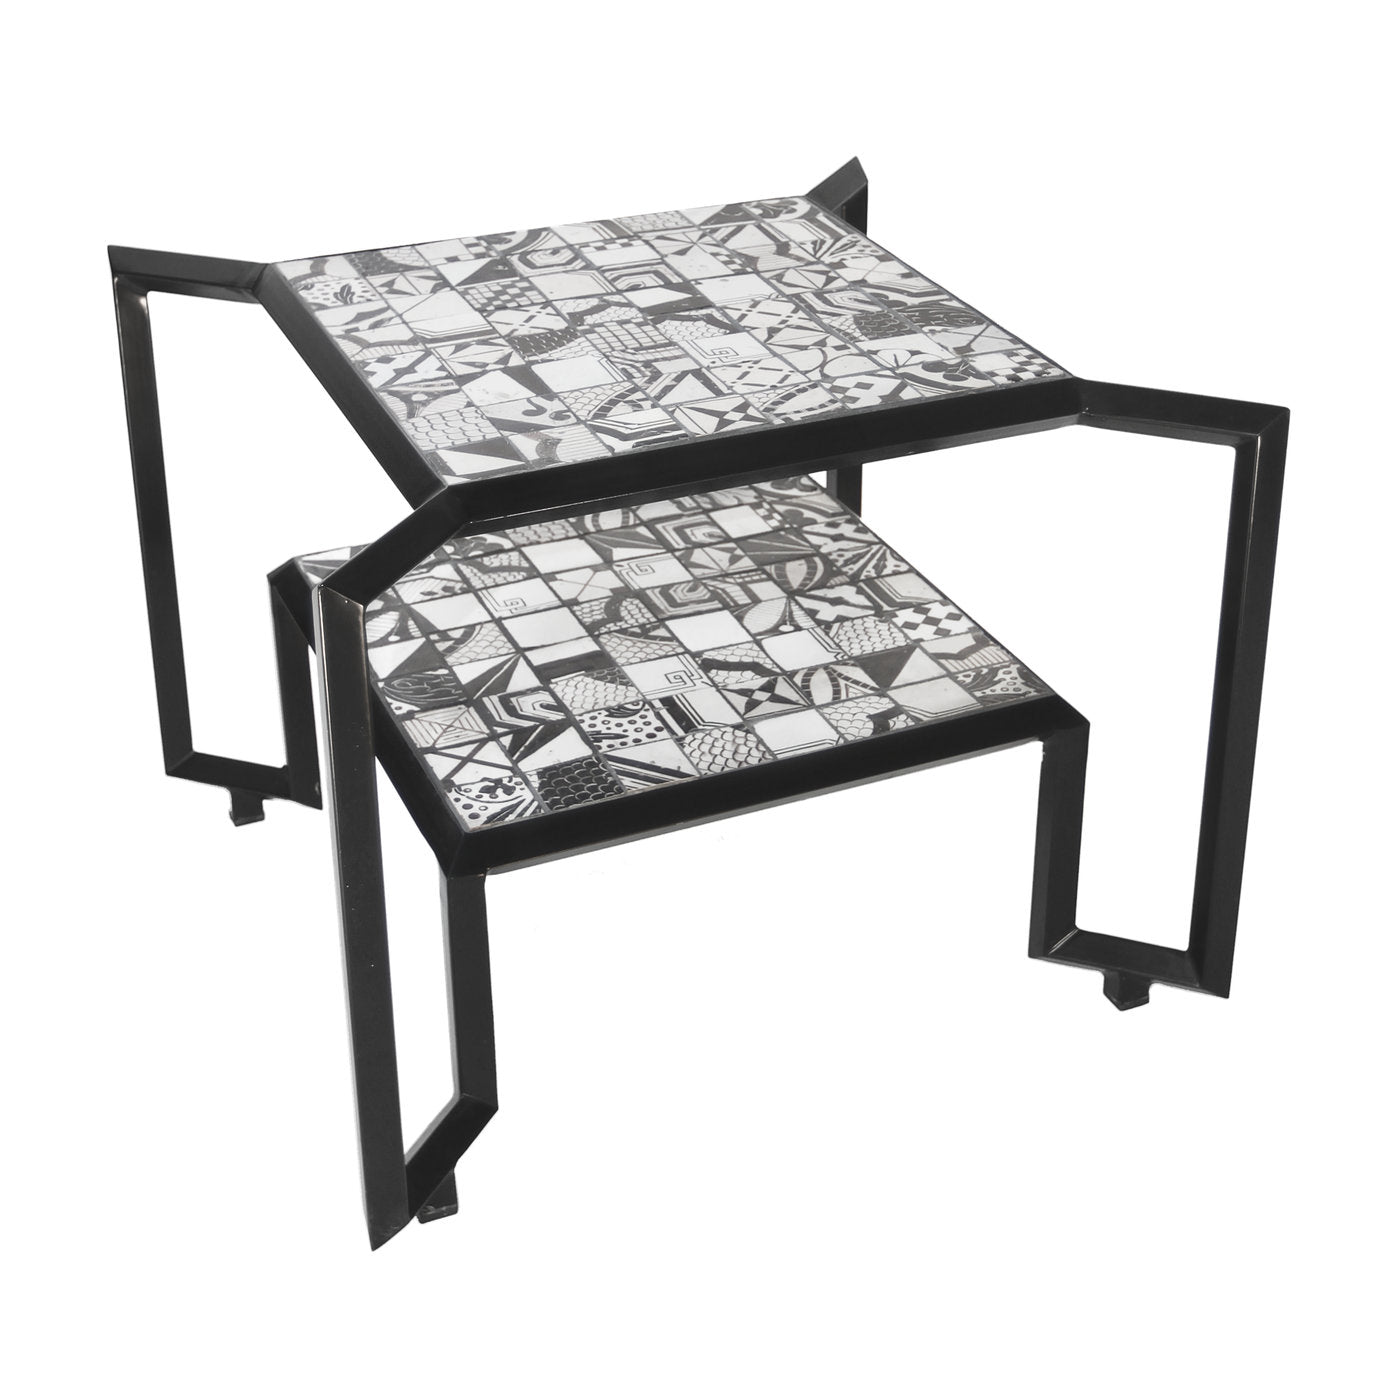 Black and White Spider Mosaic Tile Table - Alternative view 2